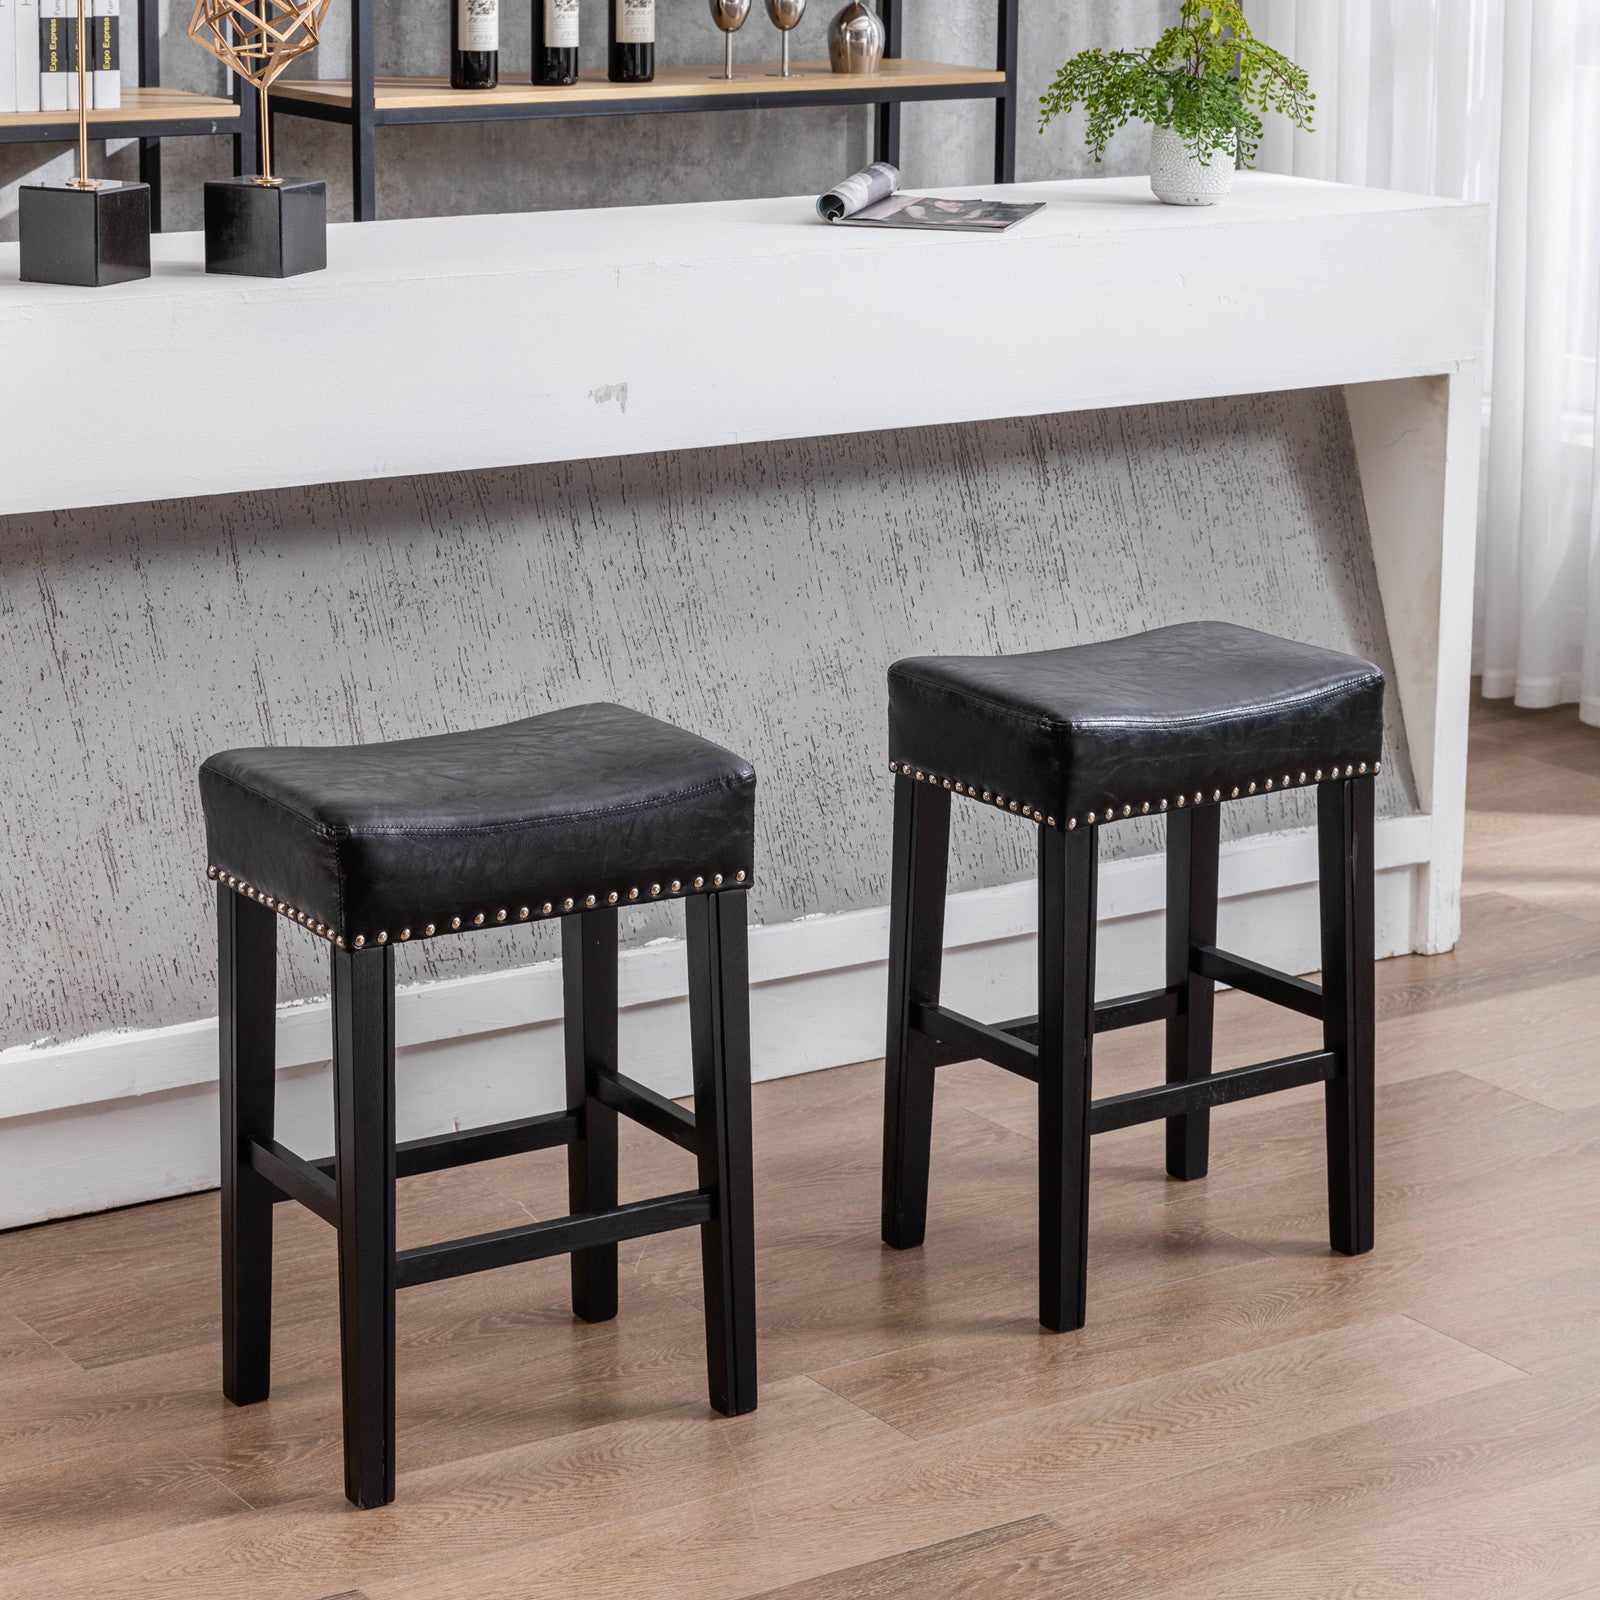 26" Backless Counter Height Stool in Black Set of 2